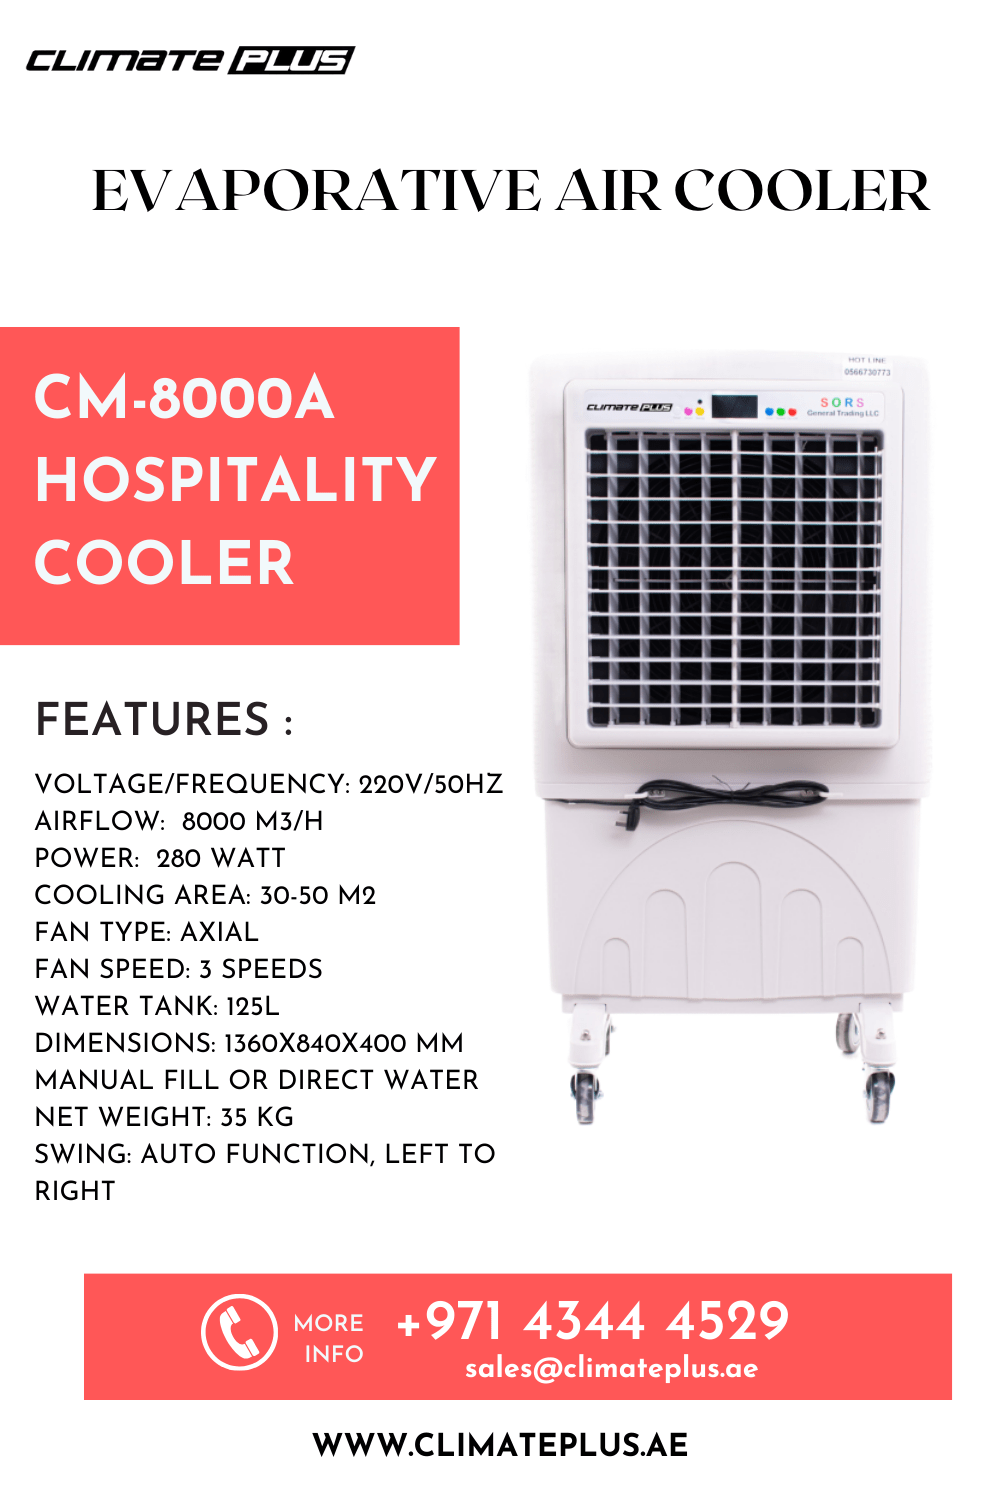 Stay Cool this Summer with Climate Plus Evaporative Air Coolers for commercial and industrial - Dubai Industrial Machineries